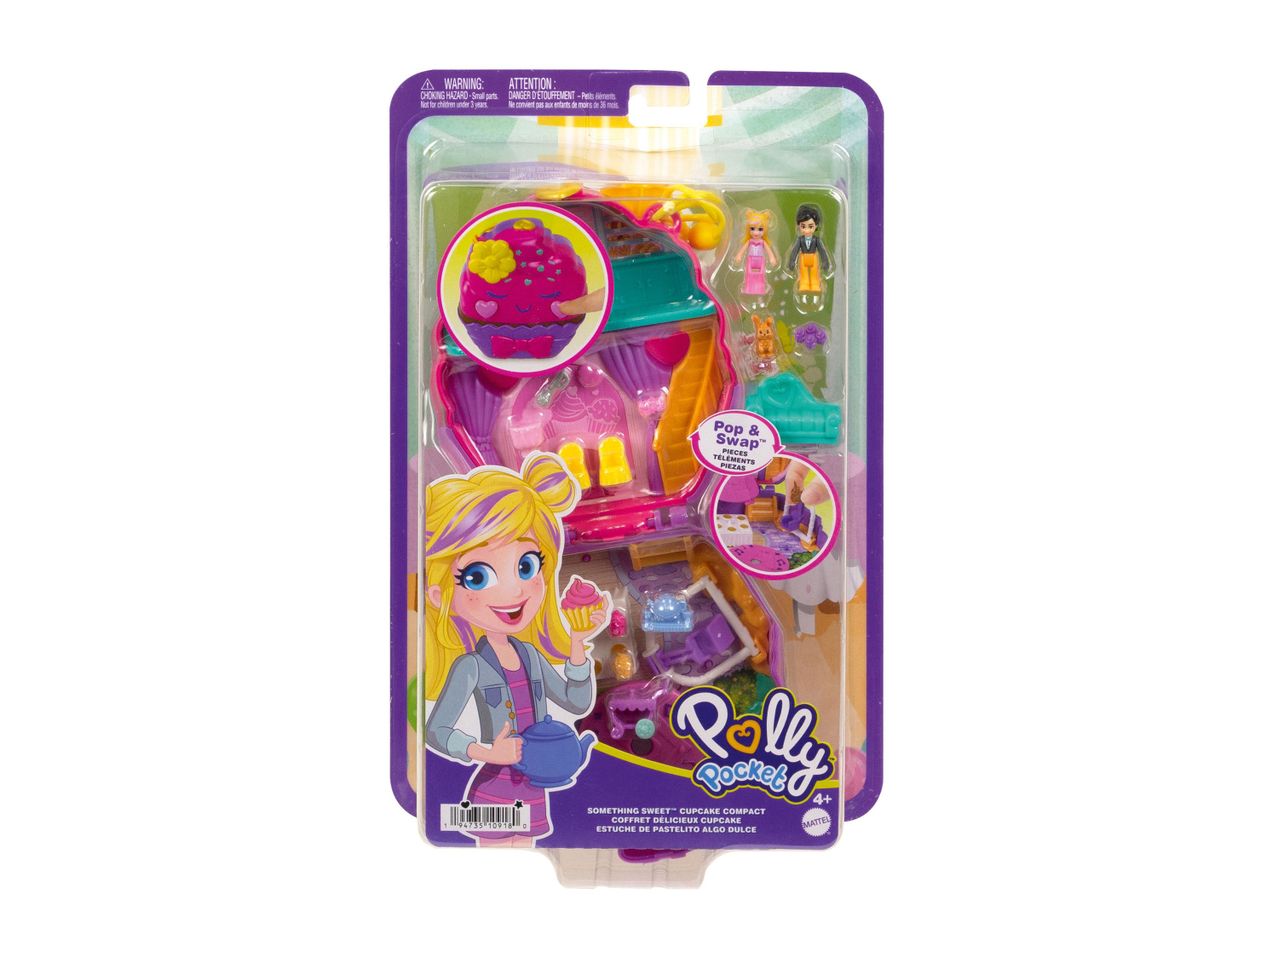 Go to full screen view: Polly Pocket Compact - Image 12